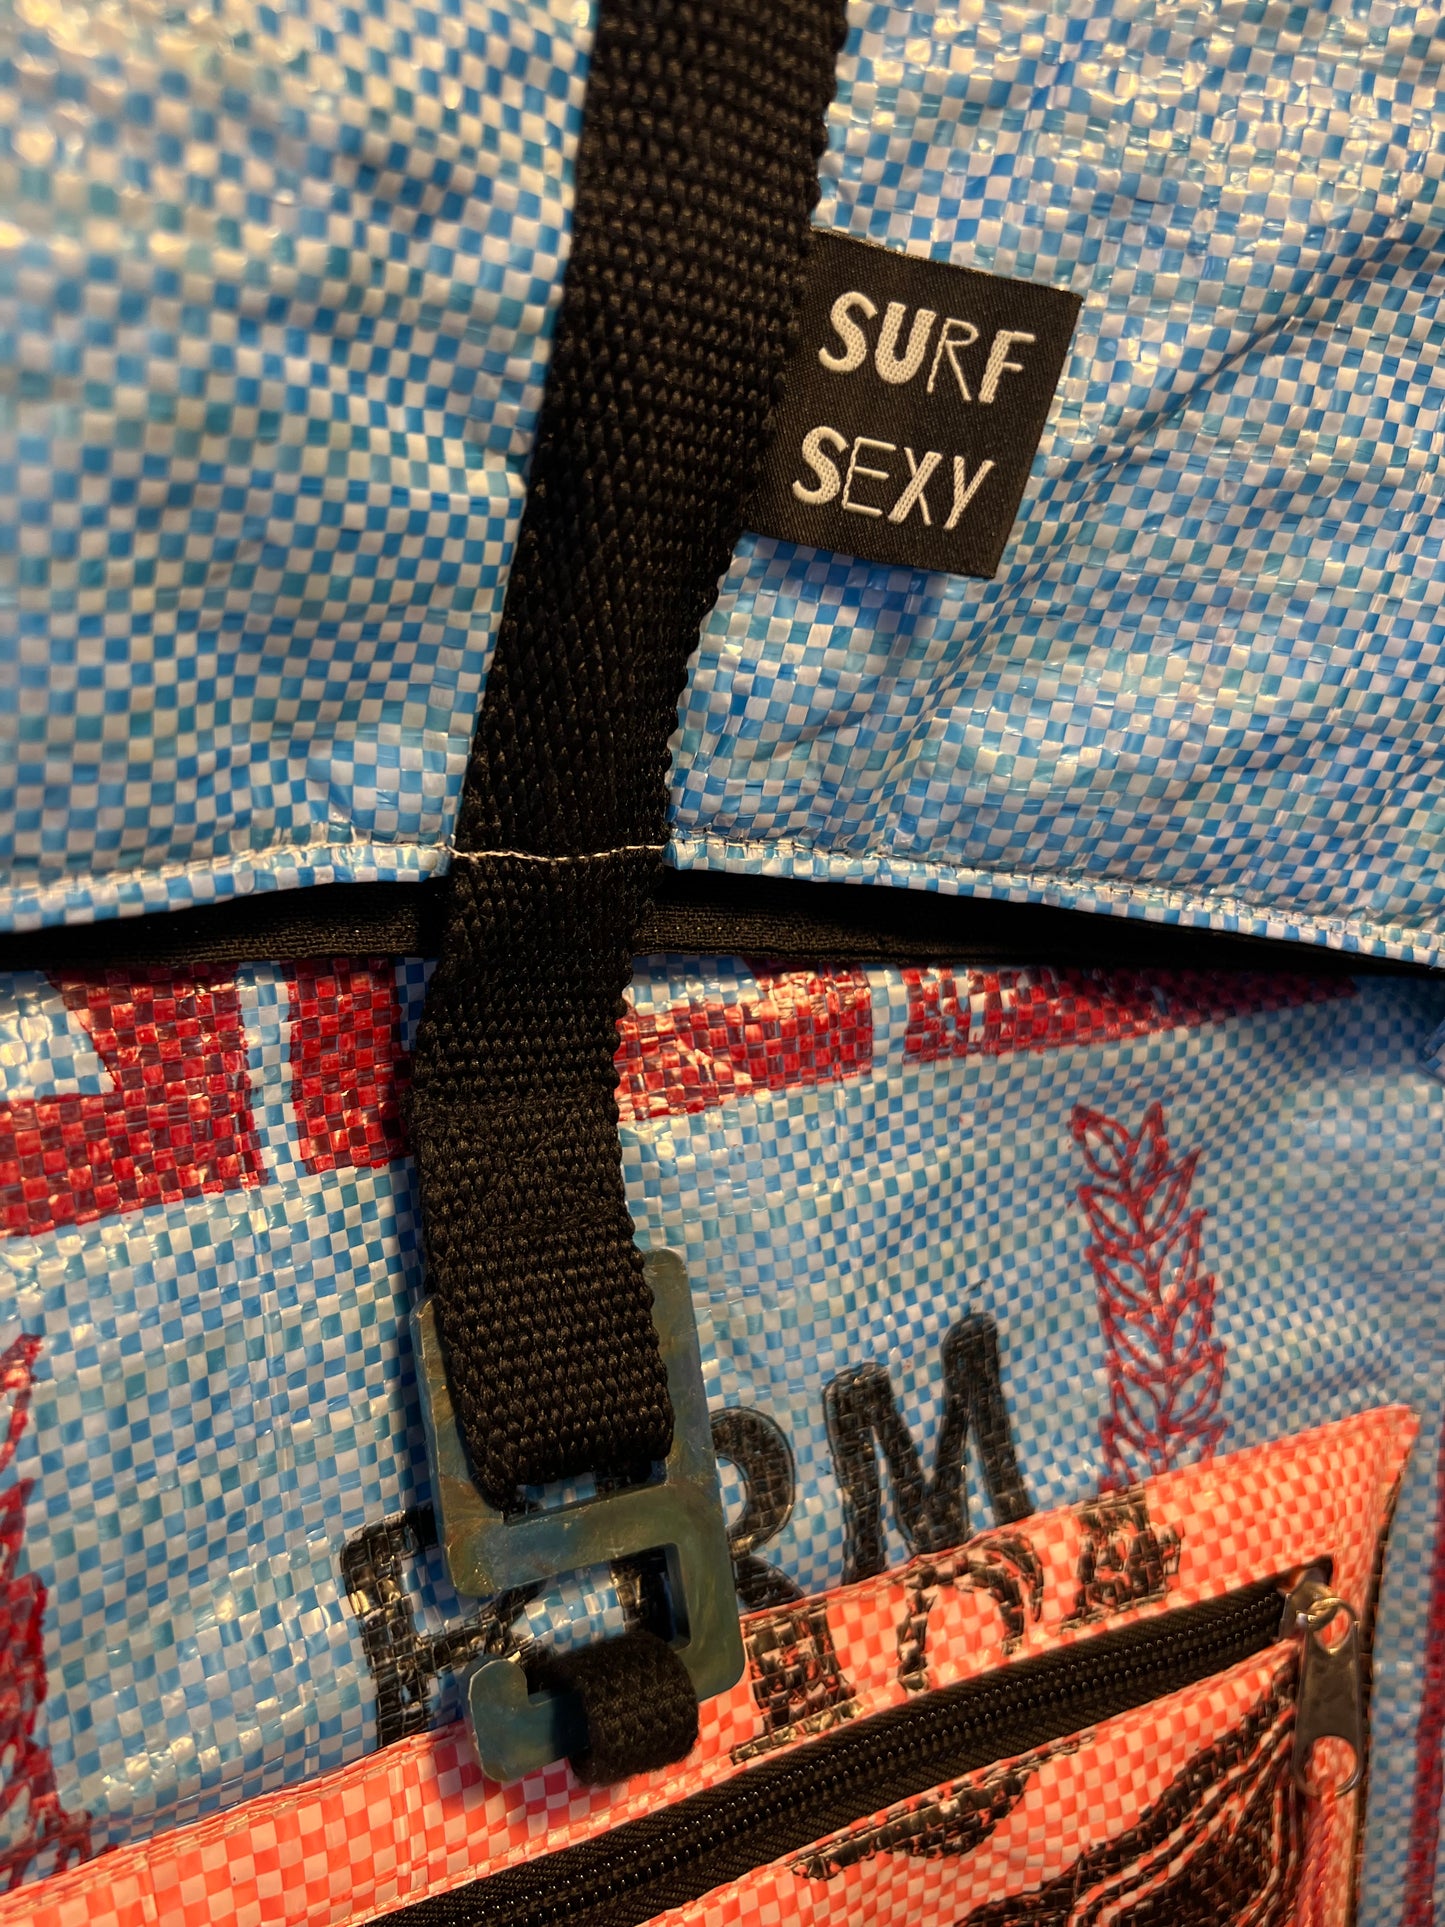 Surf Sexy Eco Backpack